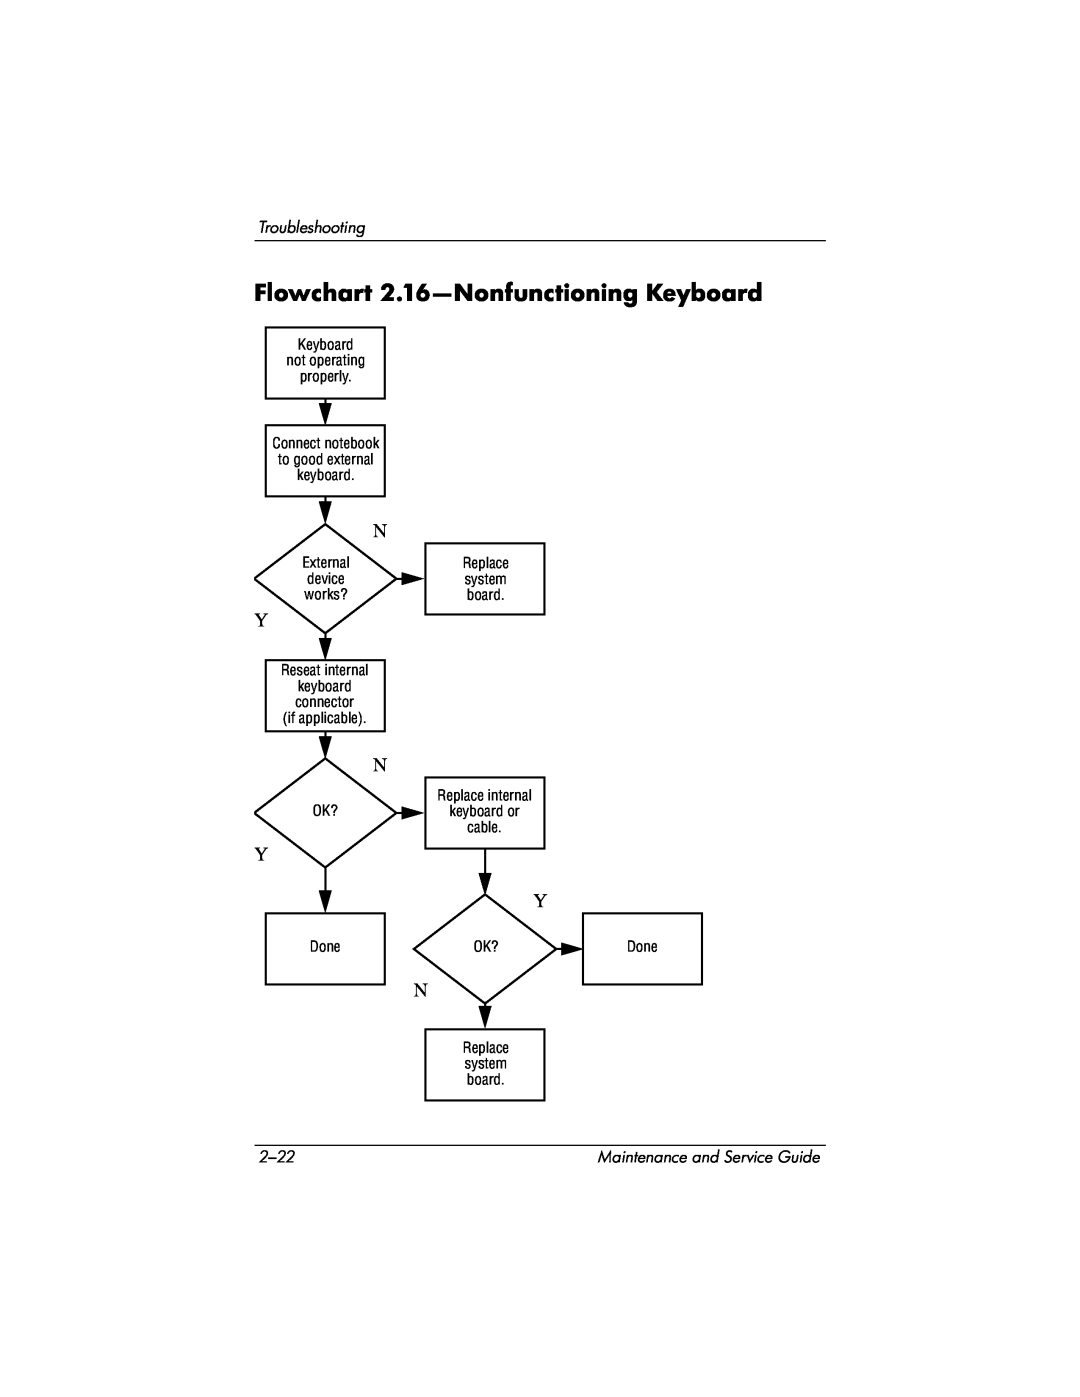 HP NX9040, NX9030, NX9020 manual Flowchart 2.16-Nonfunctioning Keyboard, Troubleshooting, 2-22, Maintenance and Service Guide 